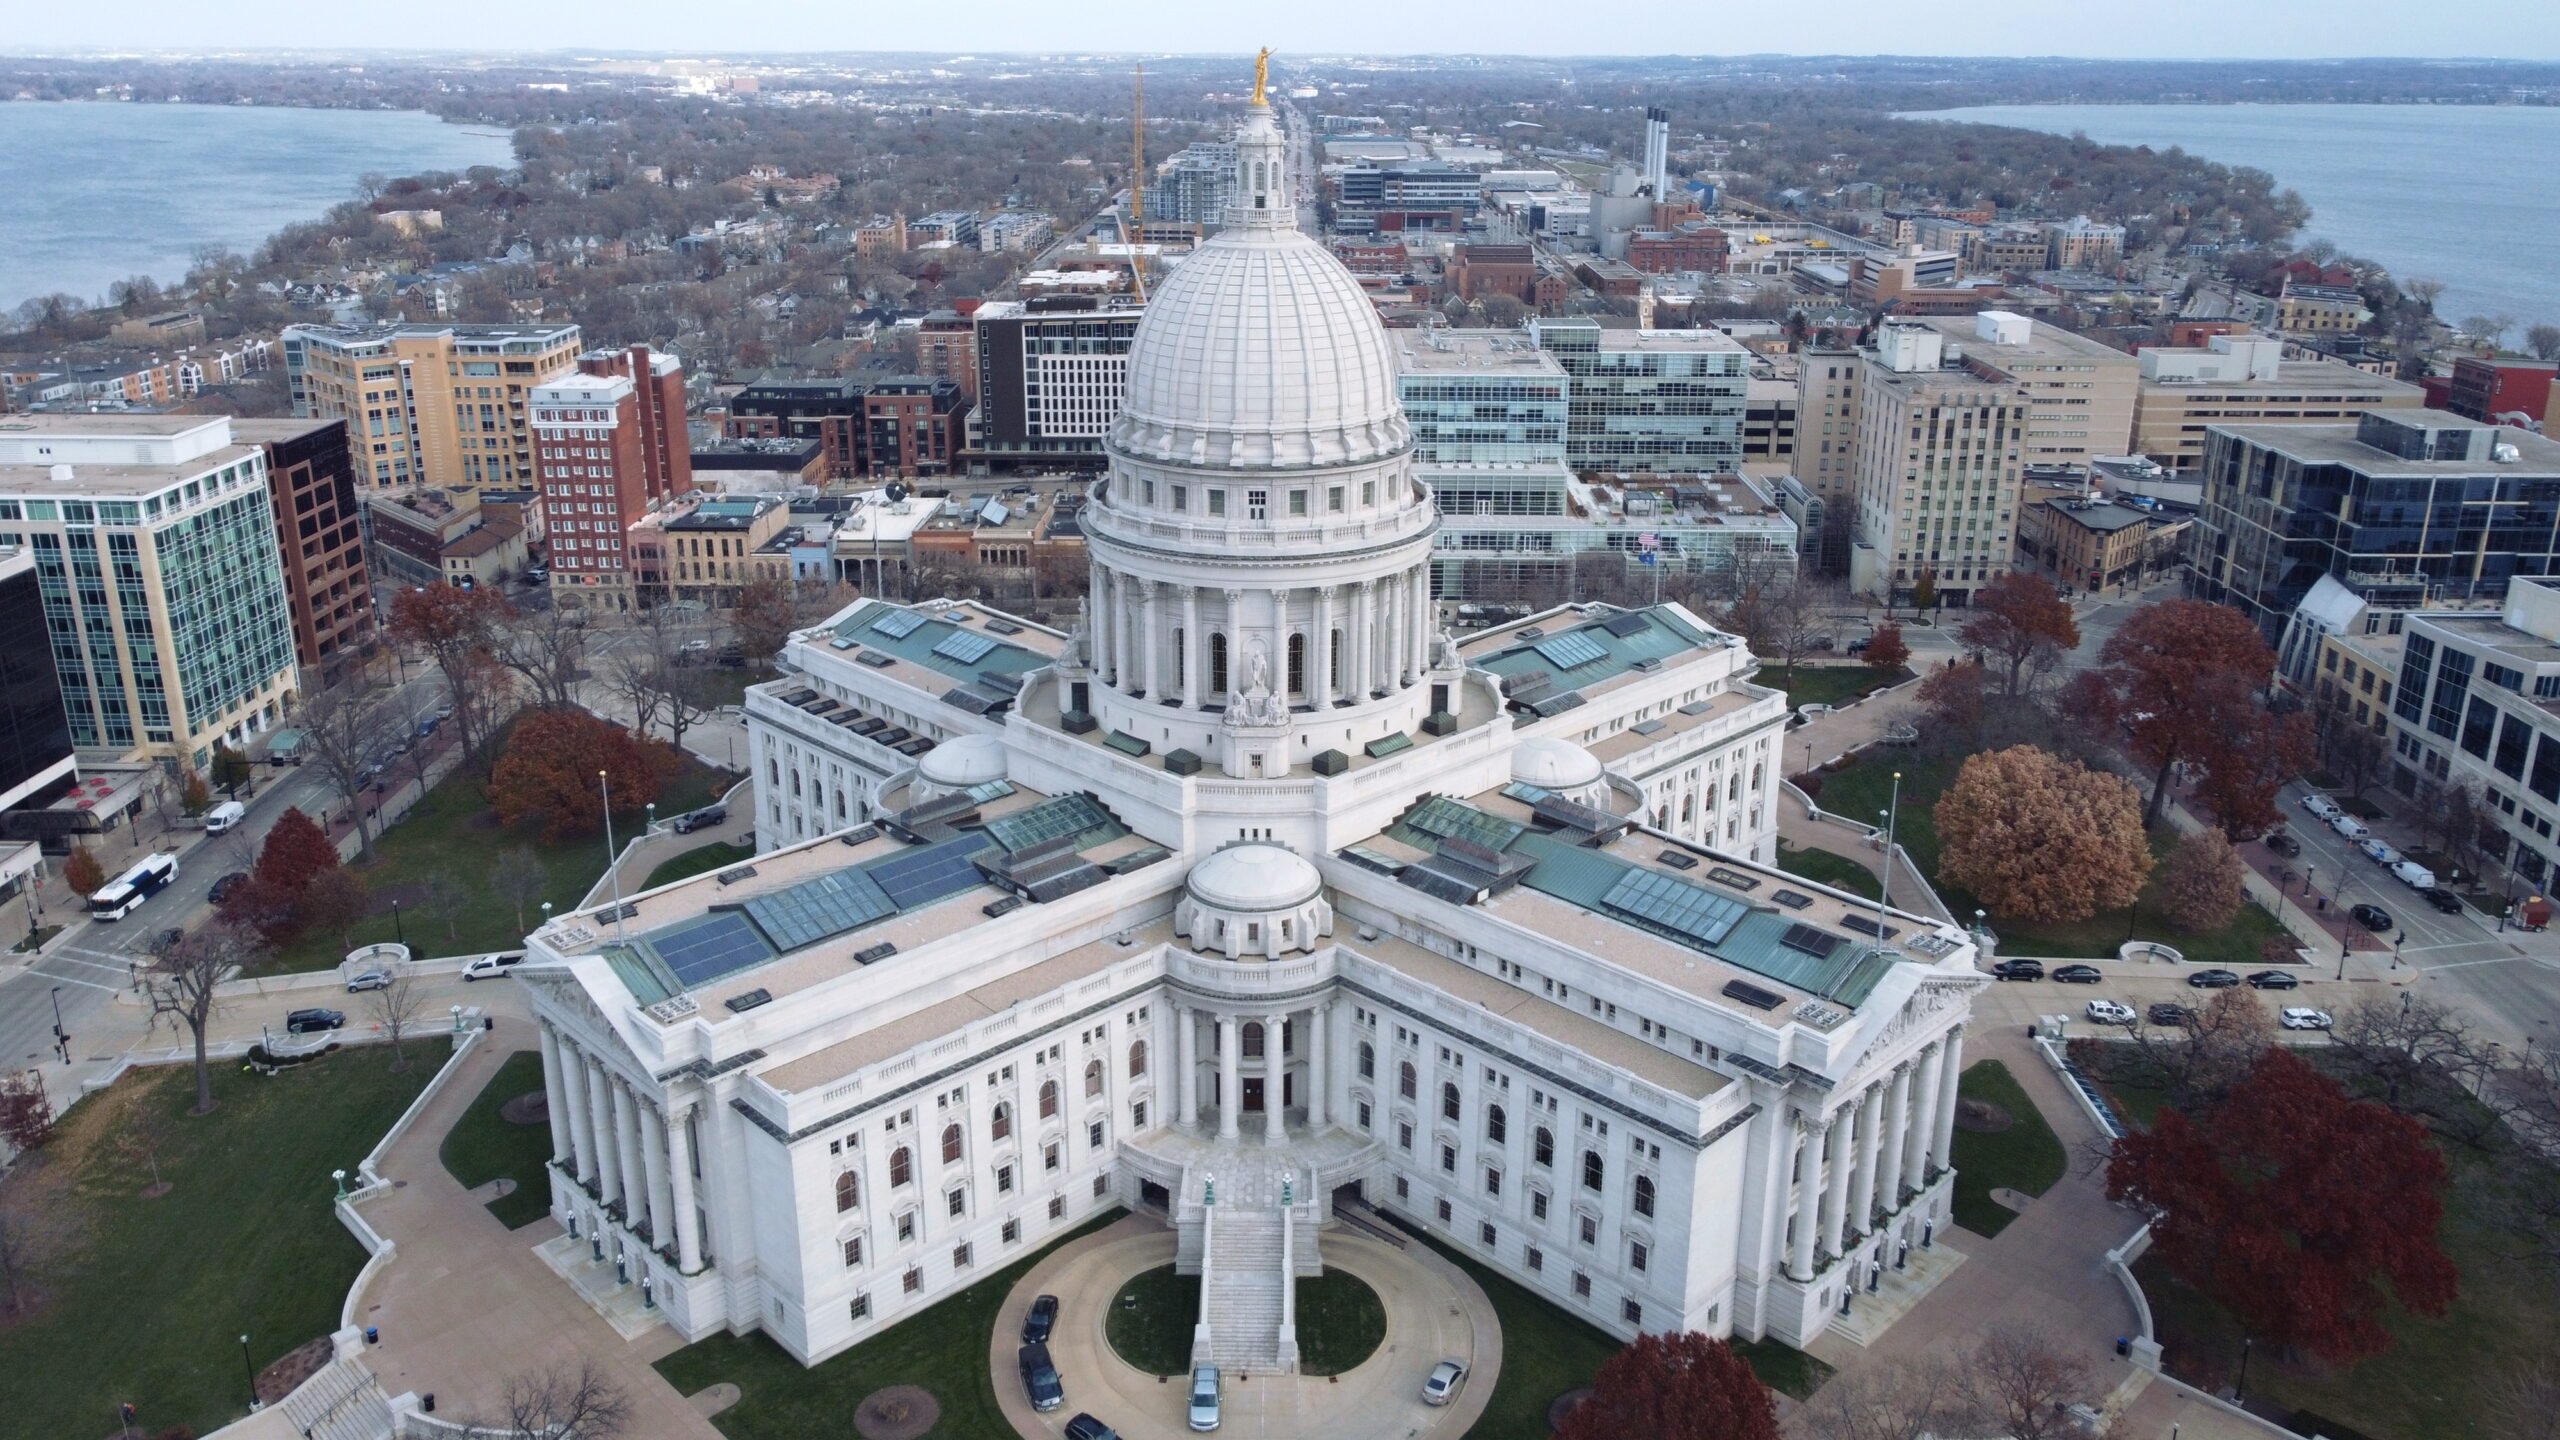 The Wisconsin state capitol building in Madison, Wisconsin.